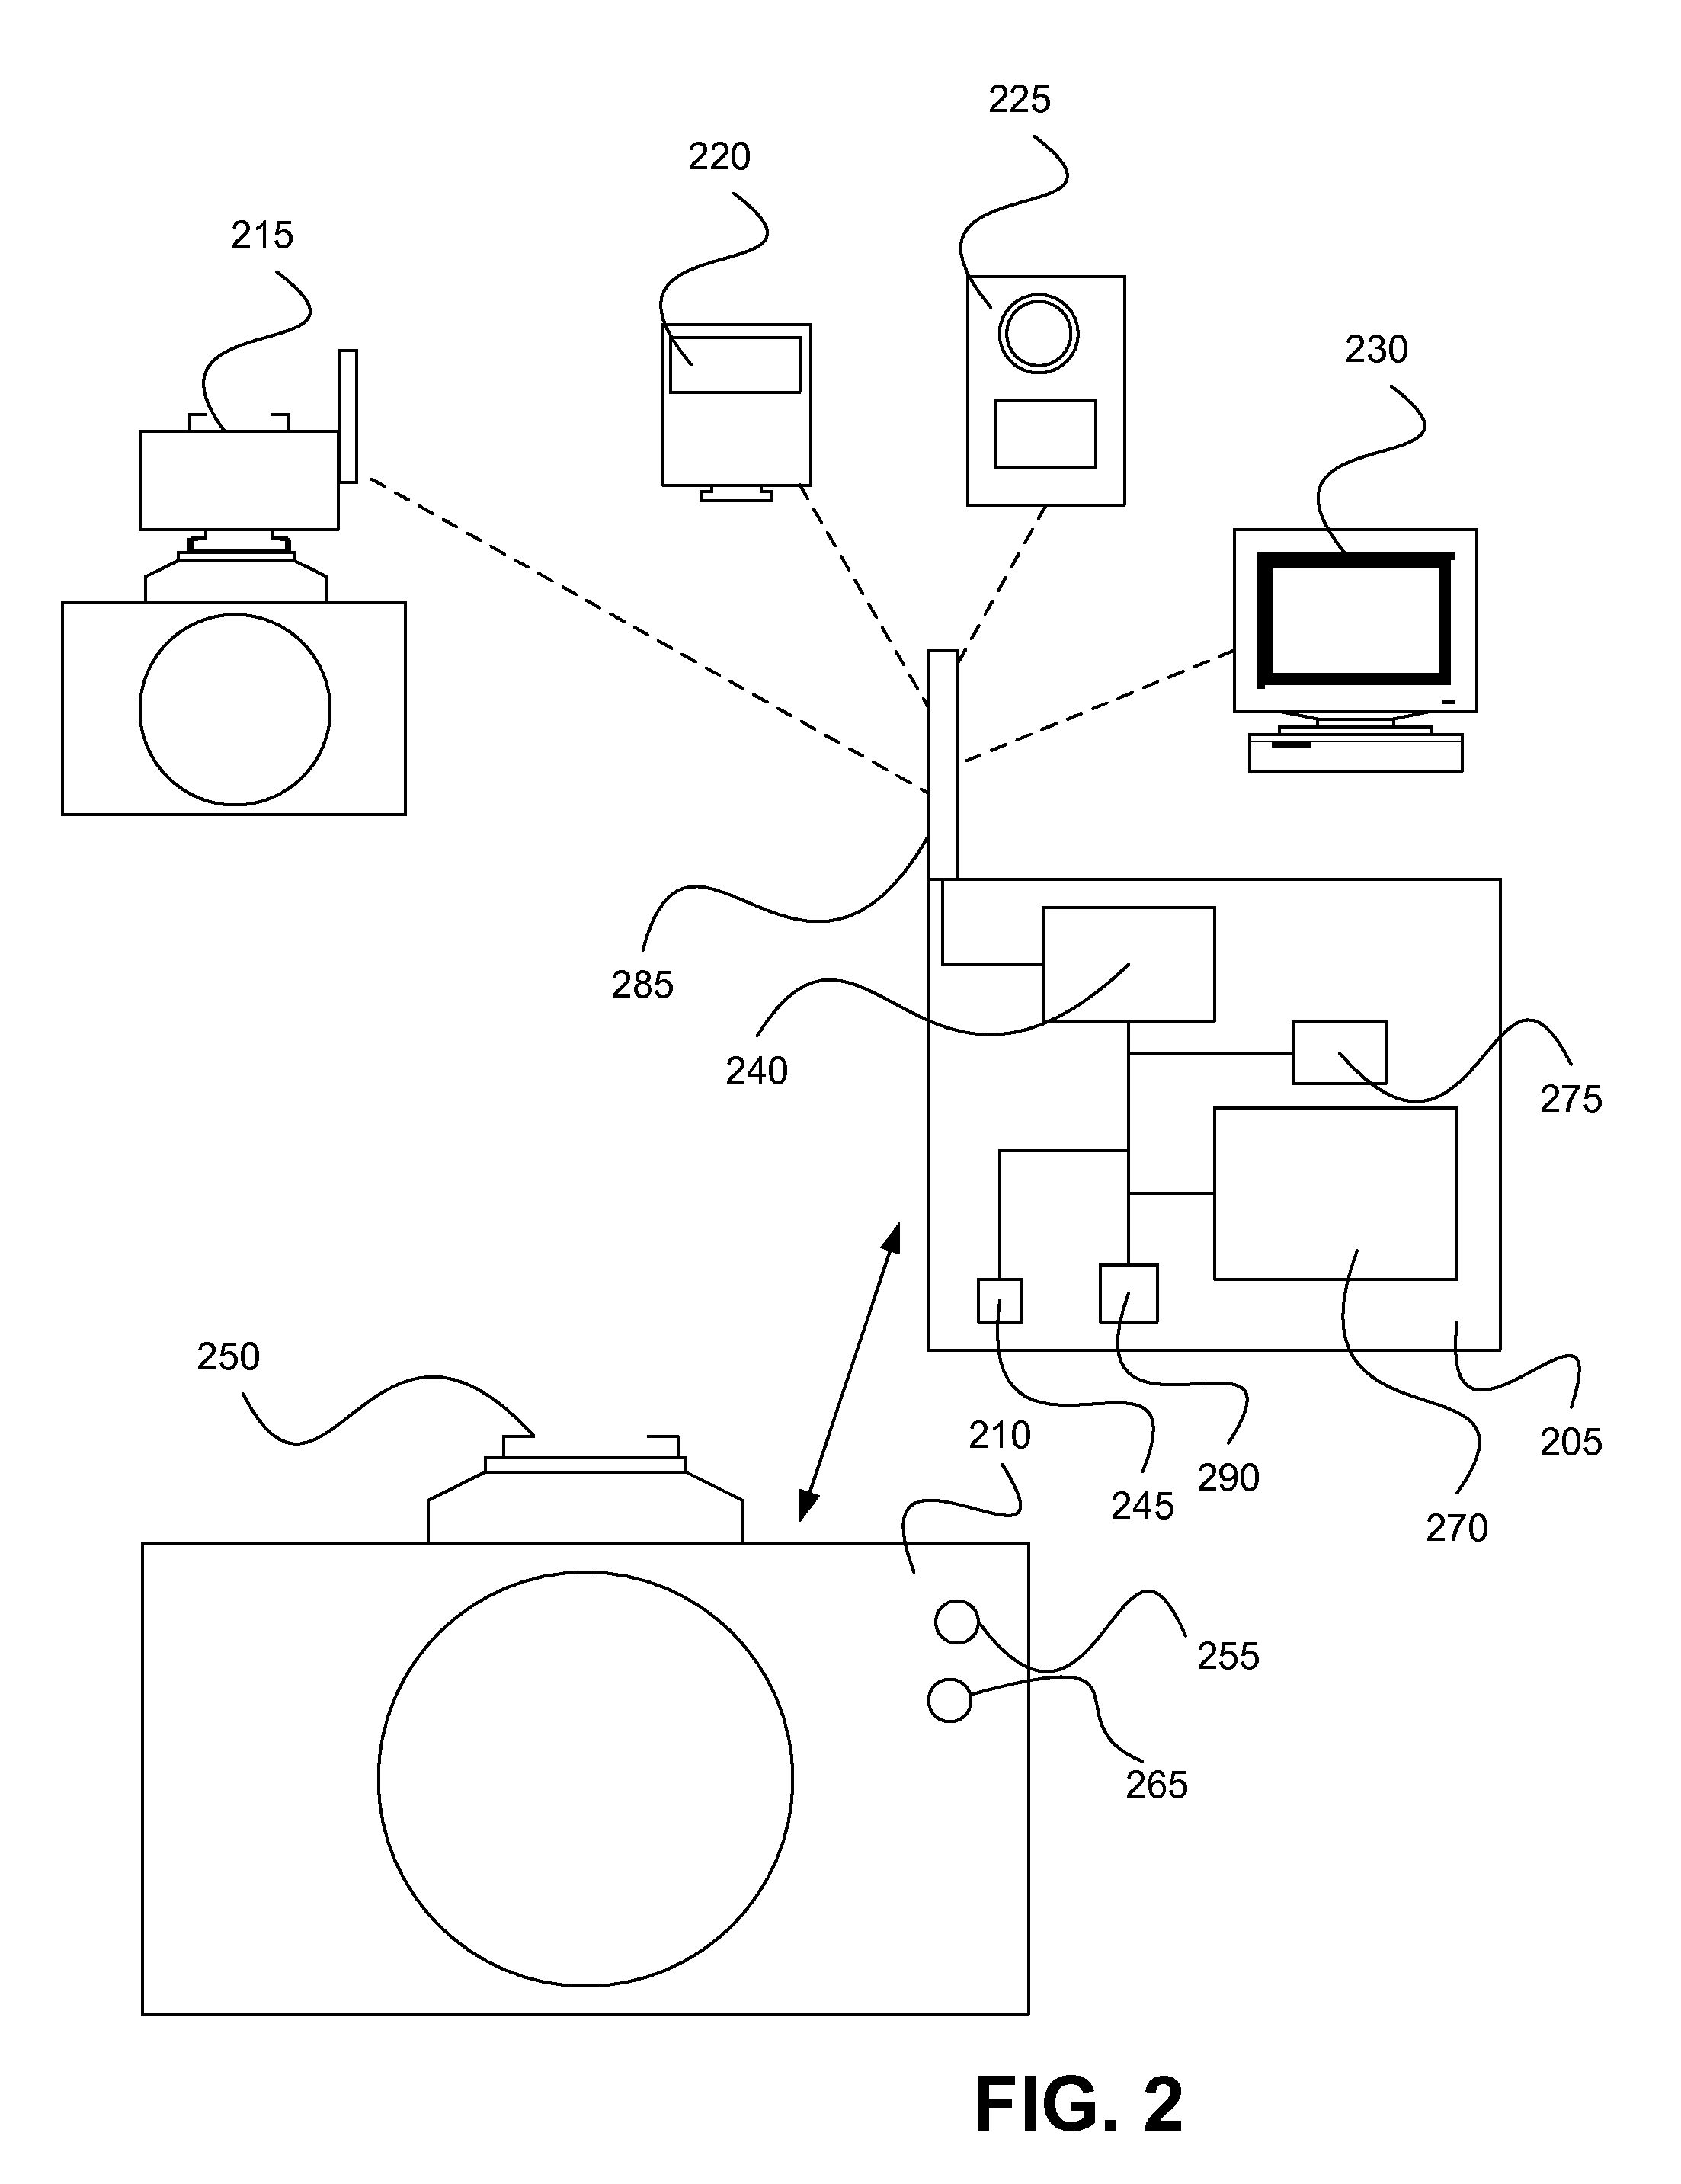 Power Management System and Method For Photographic Wireless Communication